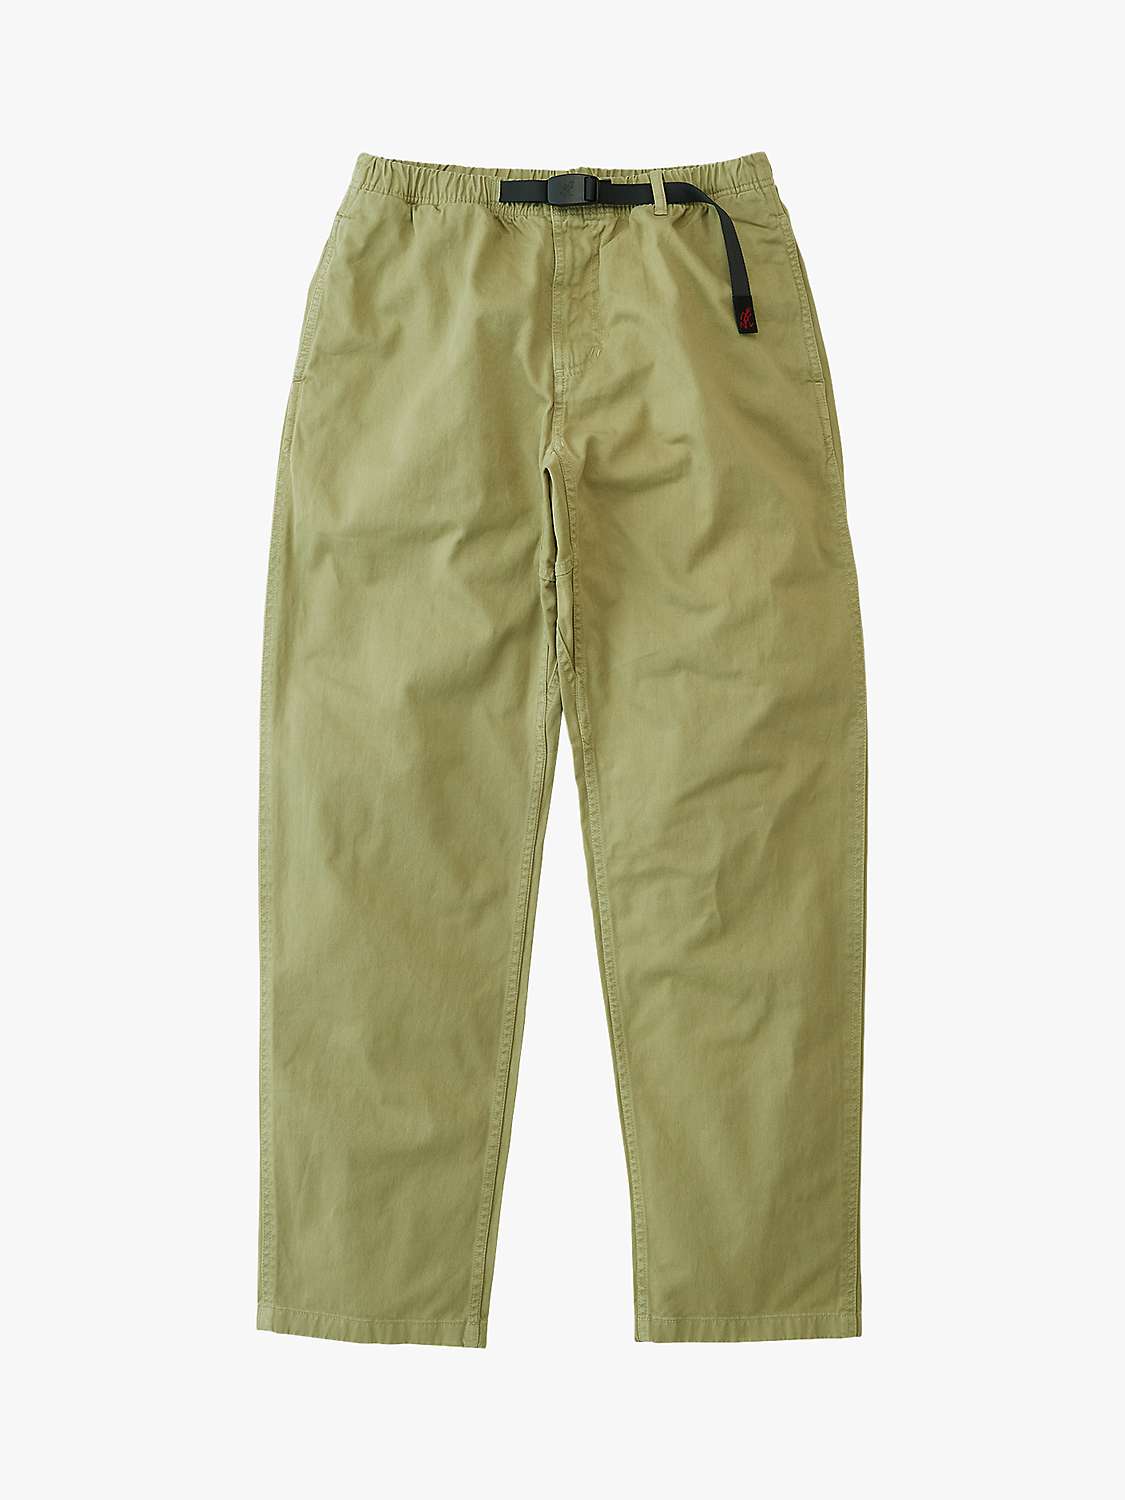 Buy Gramicci Organic Cotton Twill Trousers, Faded Olive Online at johnlewis.com